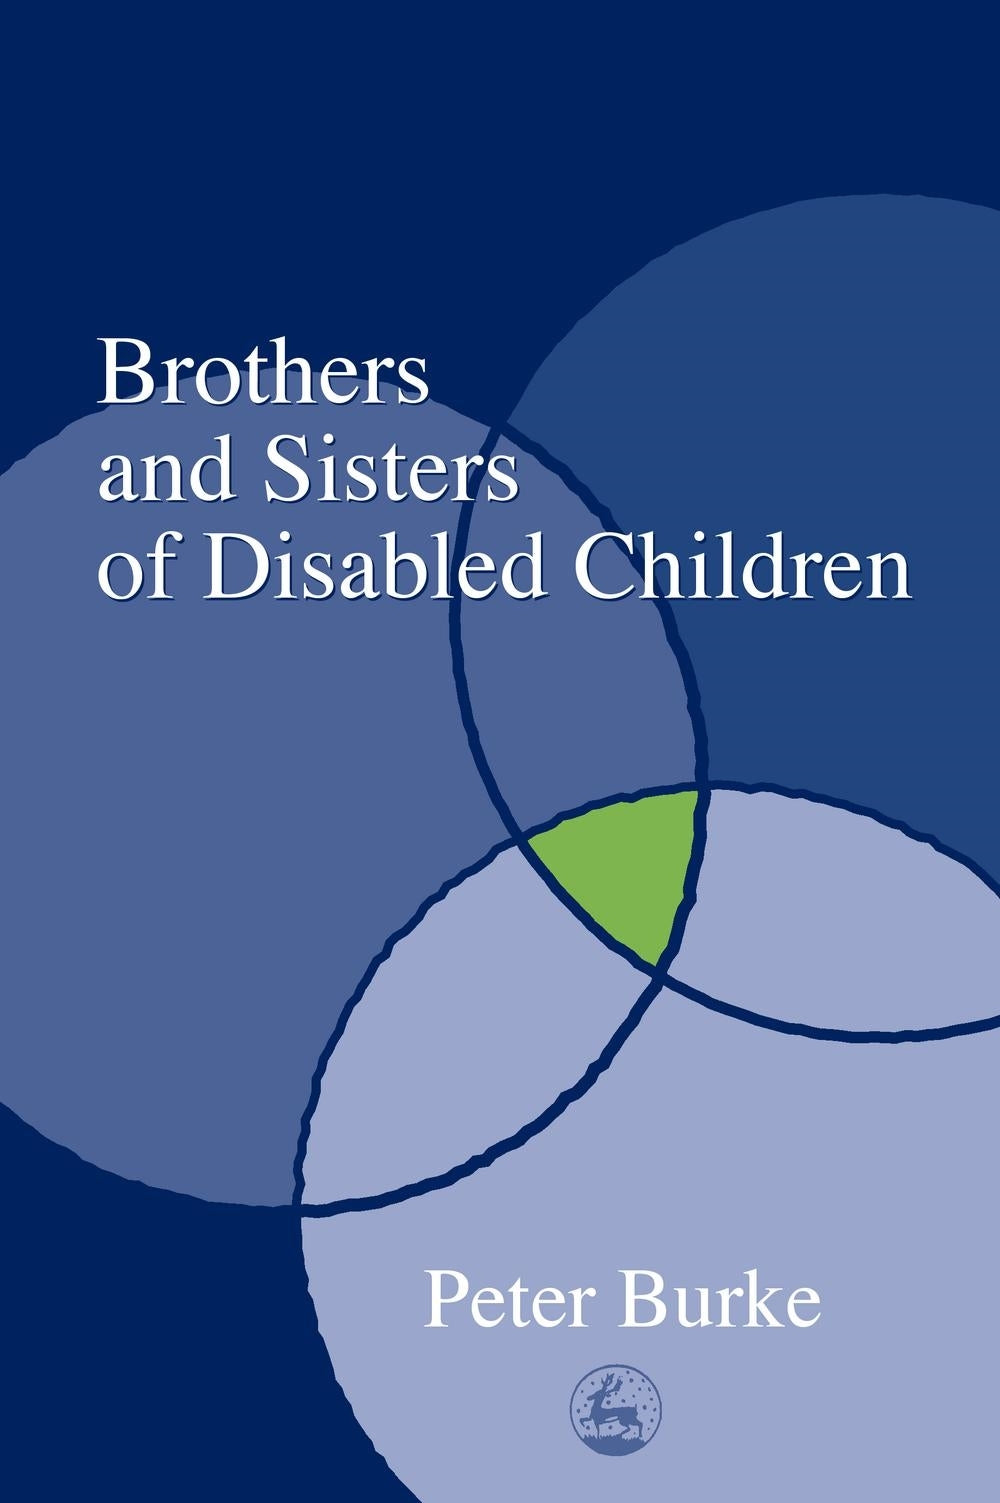 Brothers and Sisters of Disabled Children by Peter B Burke